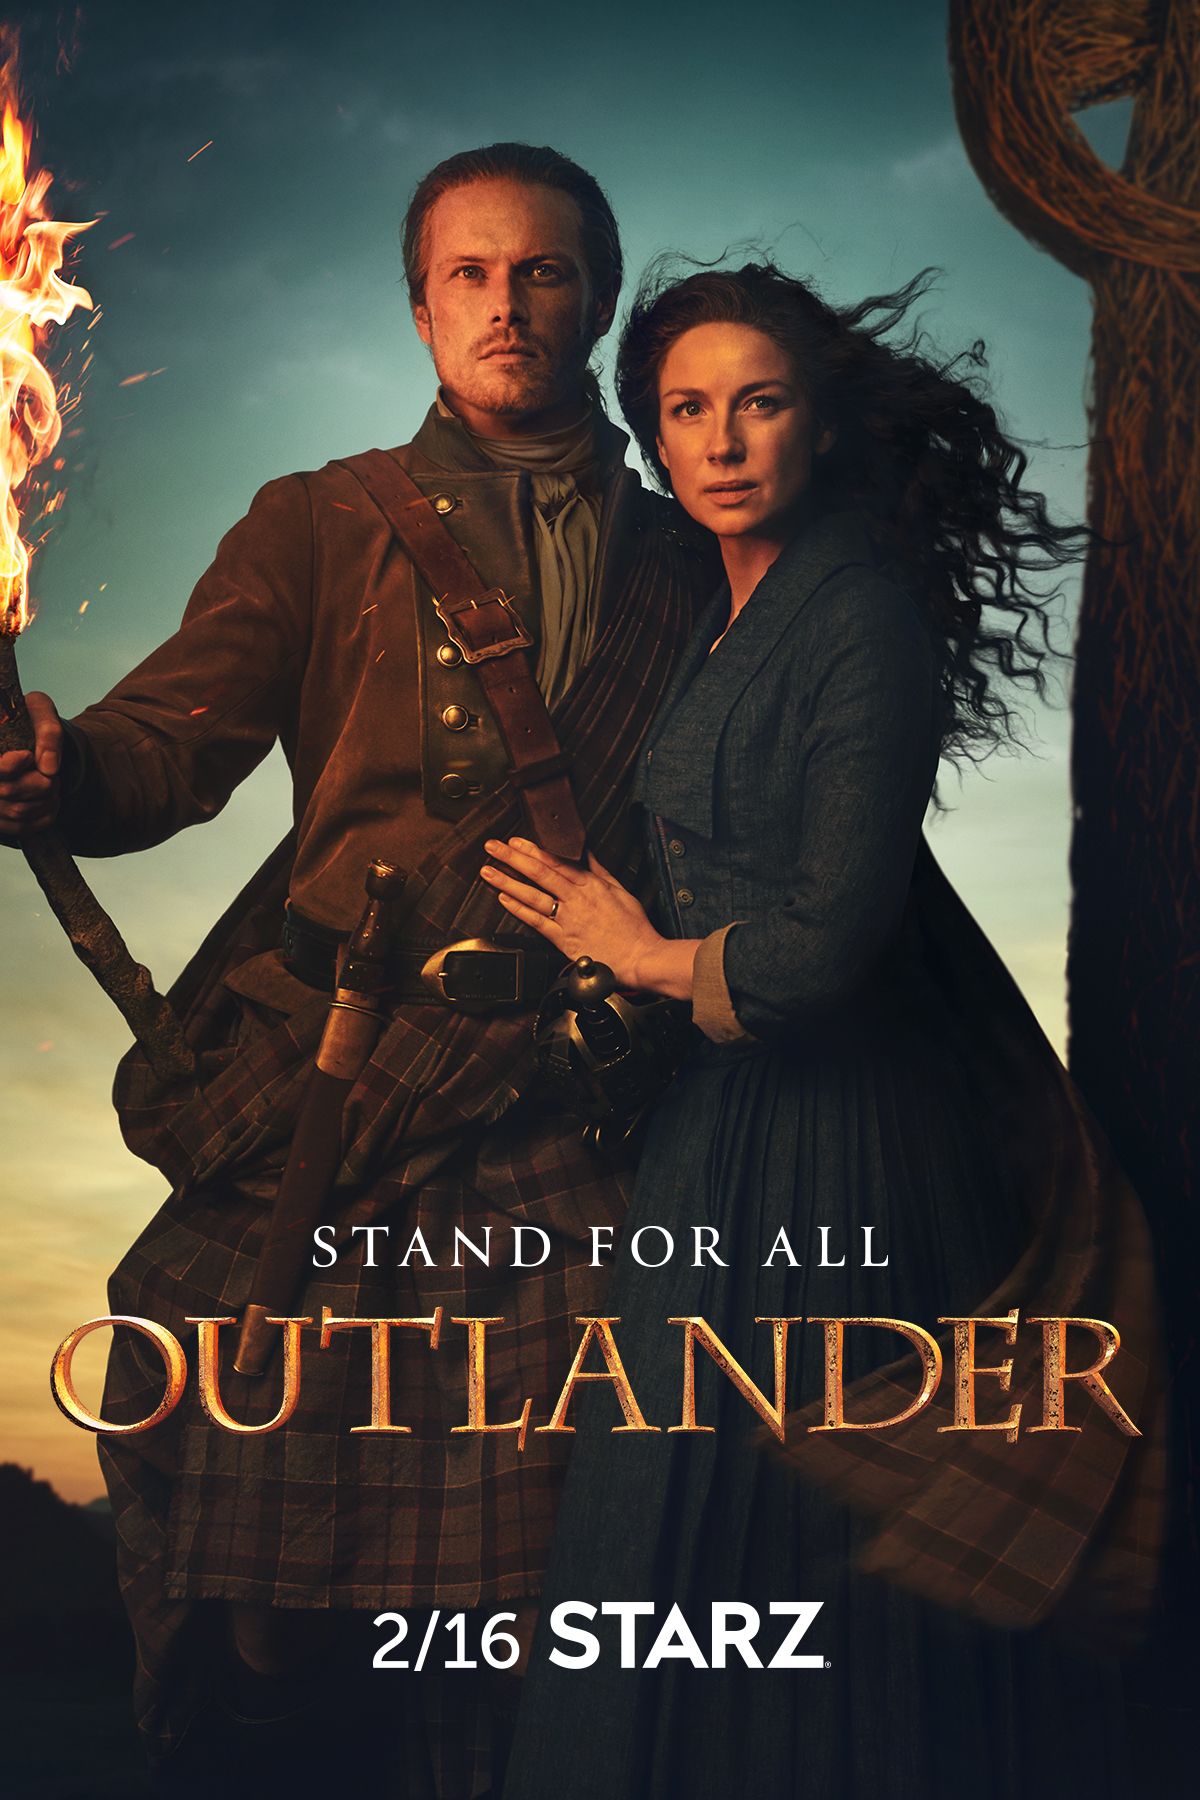 OUTLANDER photo new  photo 4X6 picture 